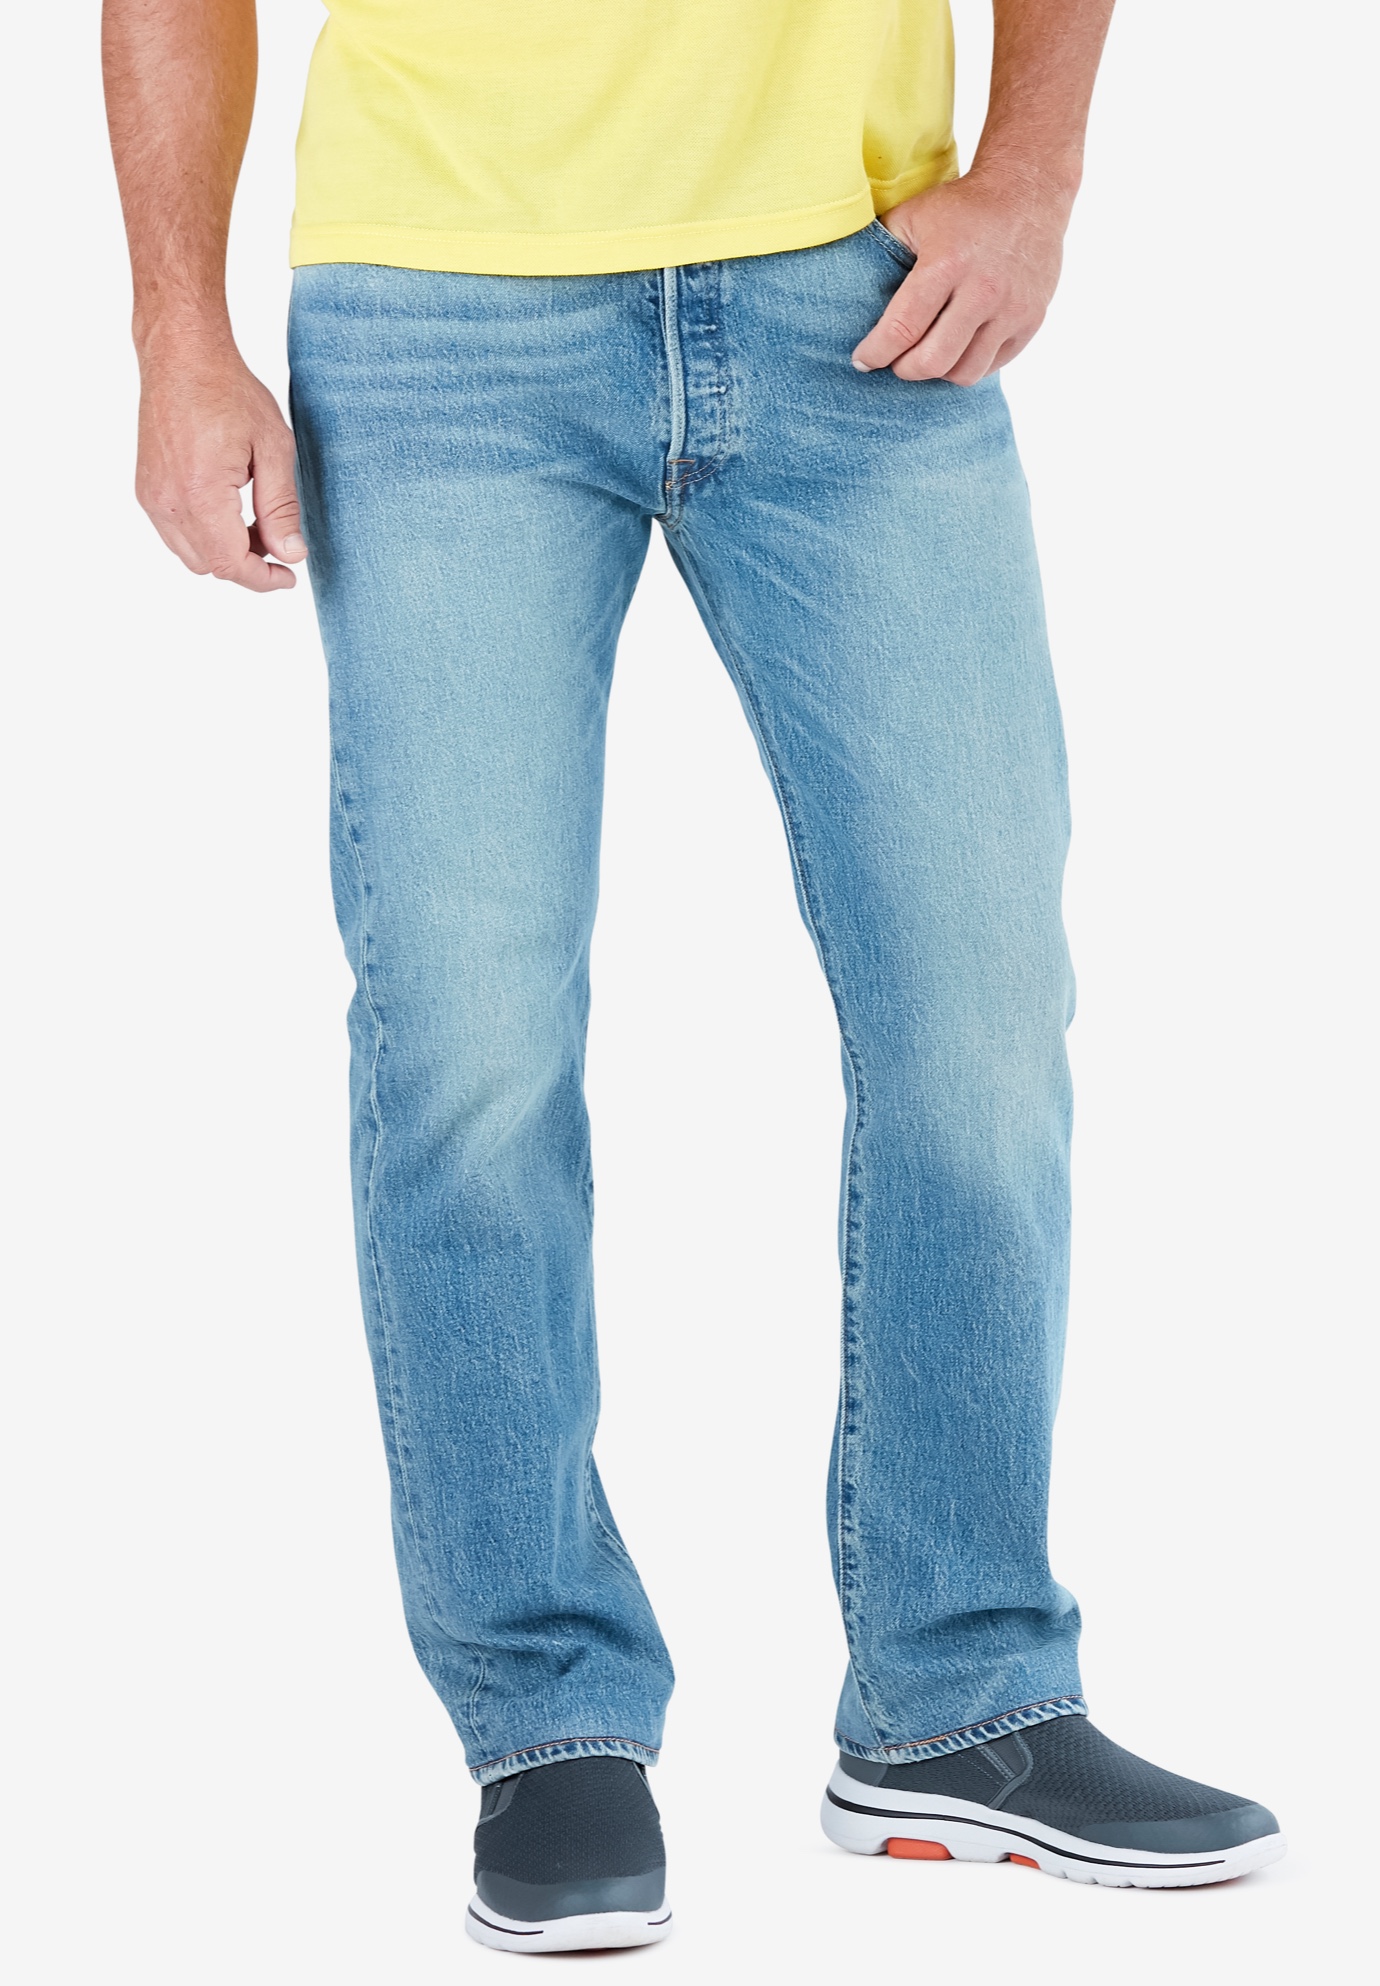 Levis® 501® Original Fit Stretch Jeans Intimates For All 